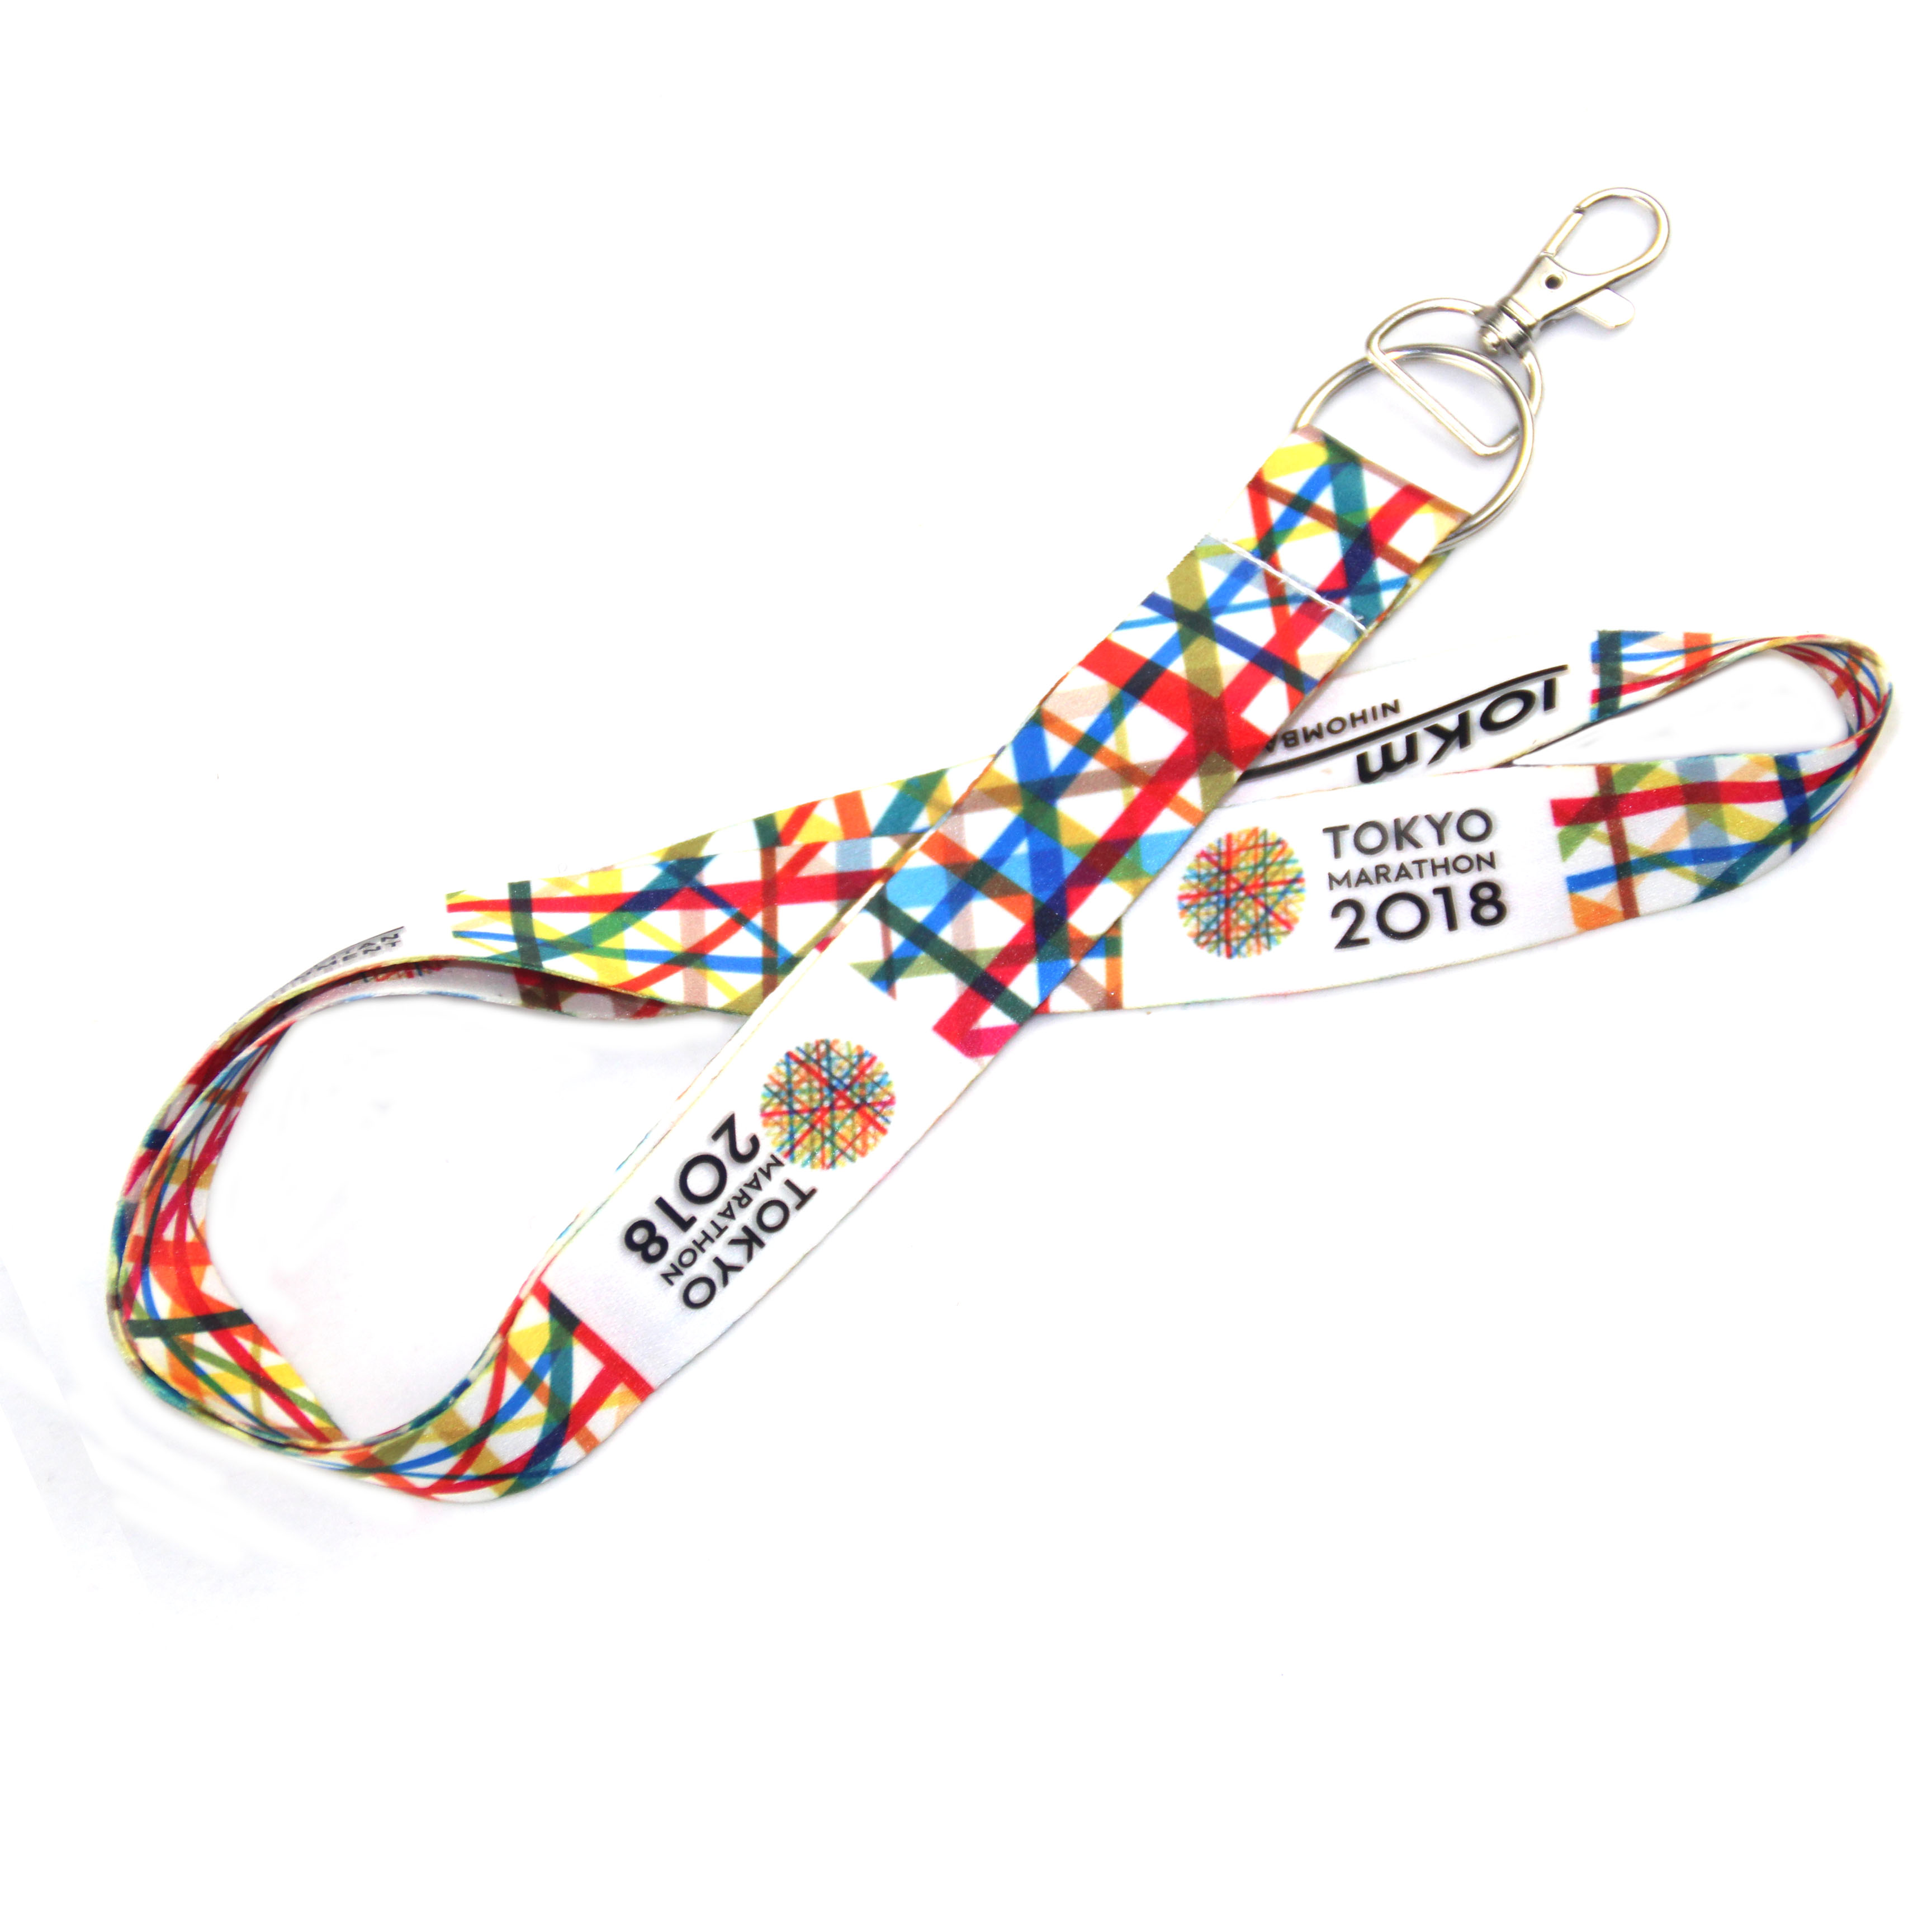 Neck Heat Transfer Lanyard for Promotion Gift